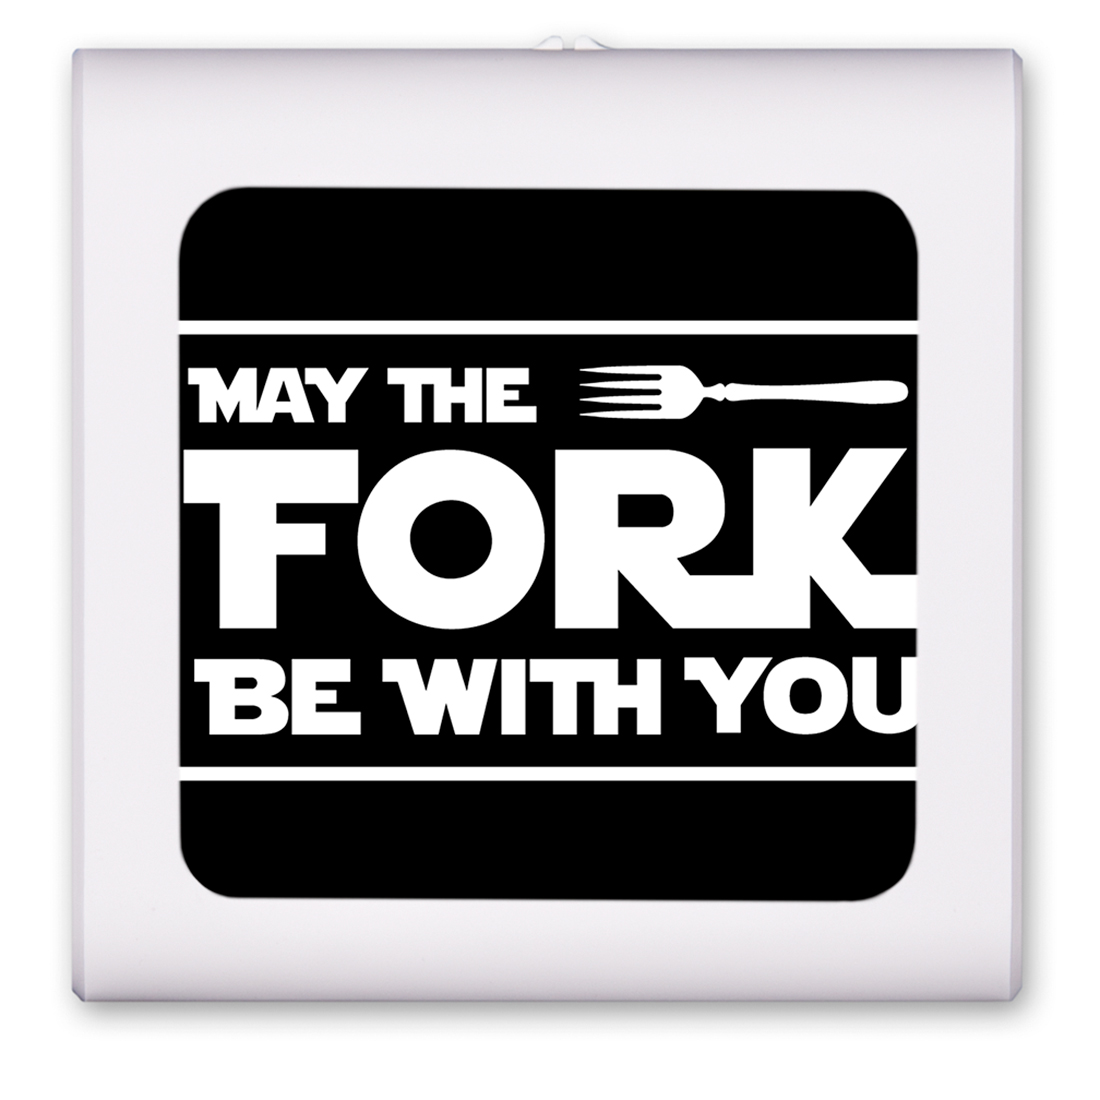 Fork Be With You - #8657